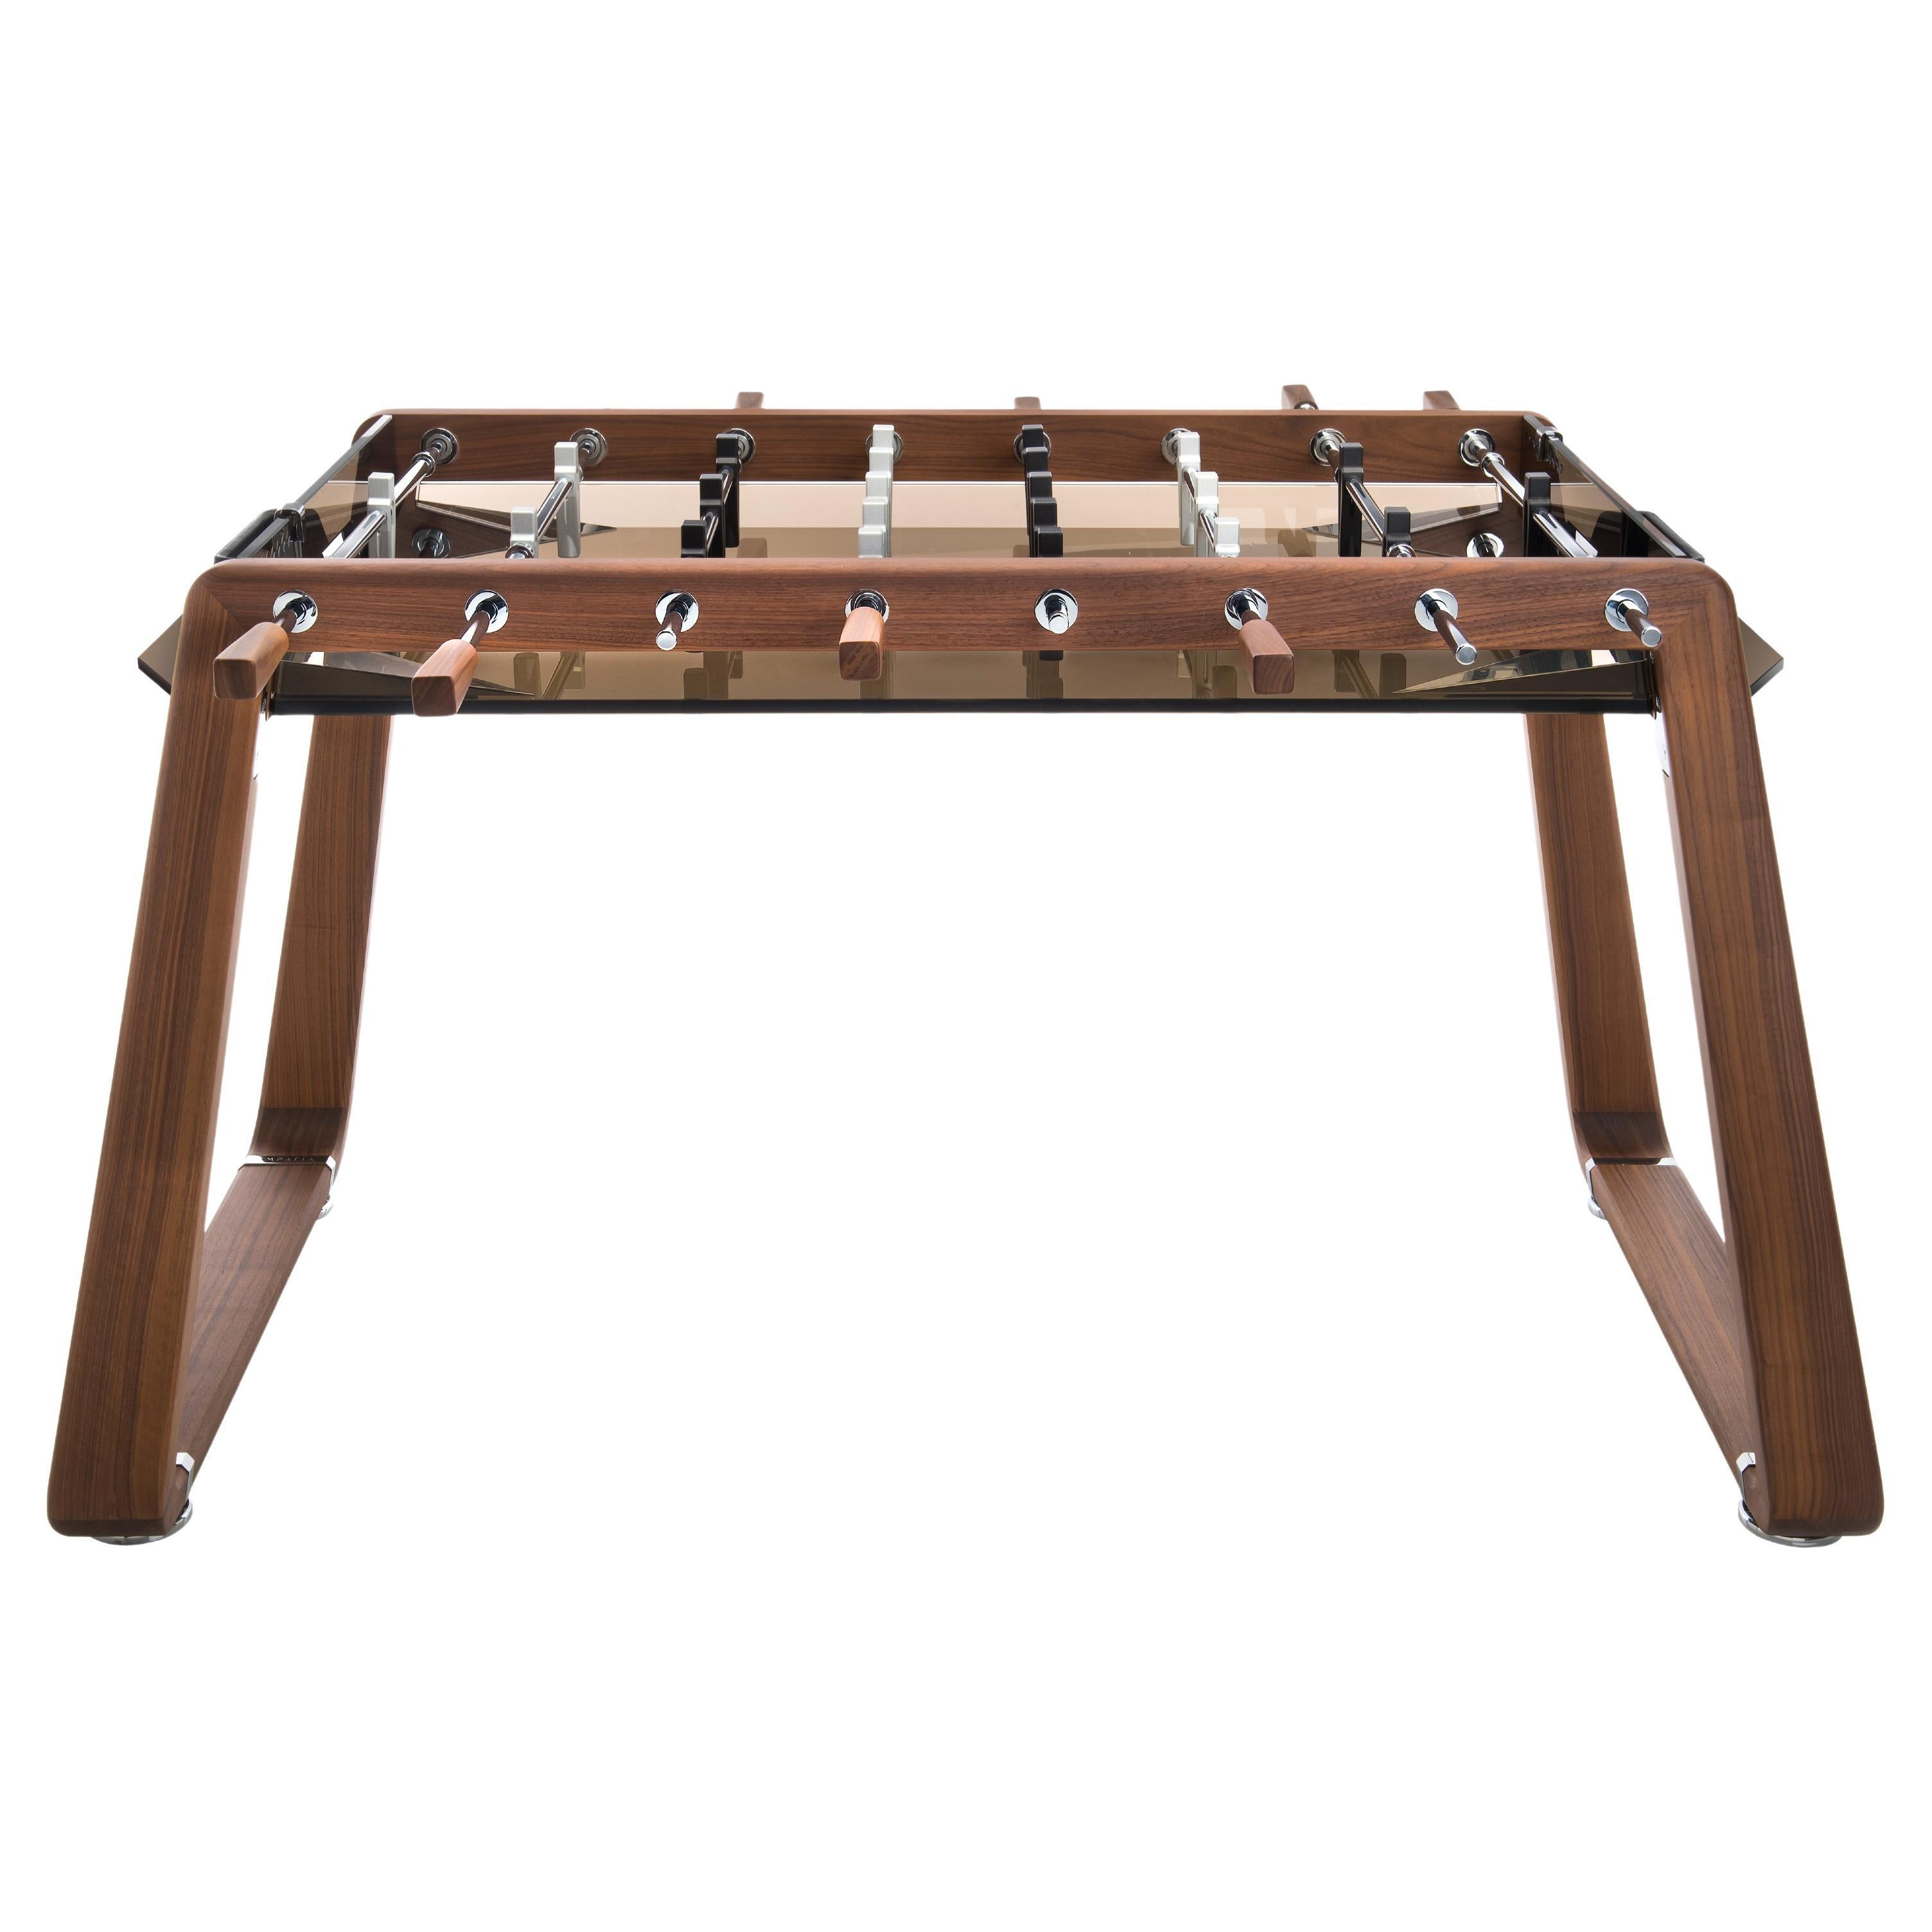 Contemporary Foosball Table Derby with Walnut Wood and Smoked Glass by Impatia